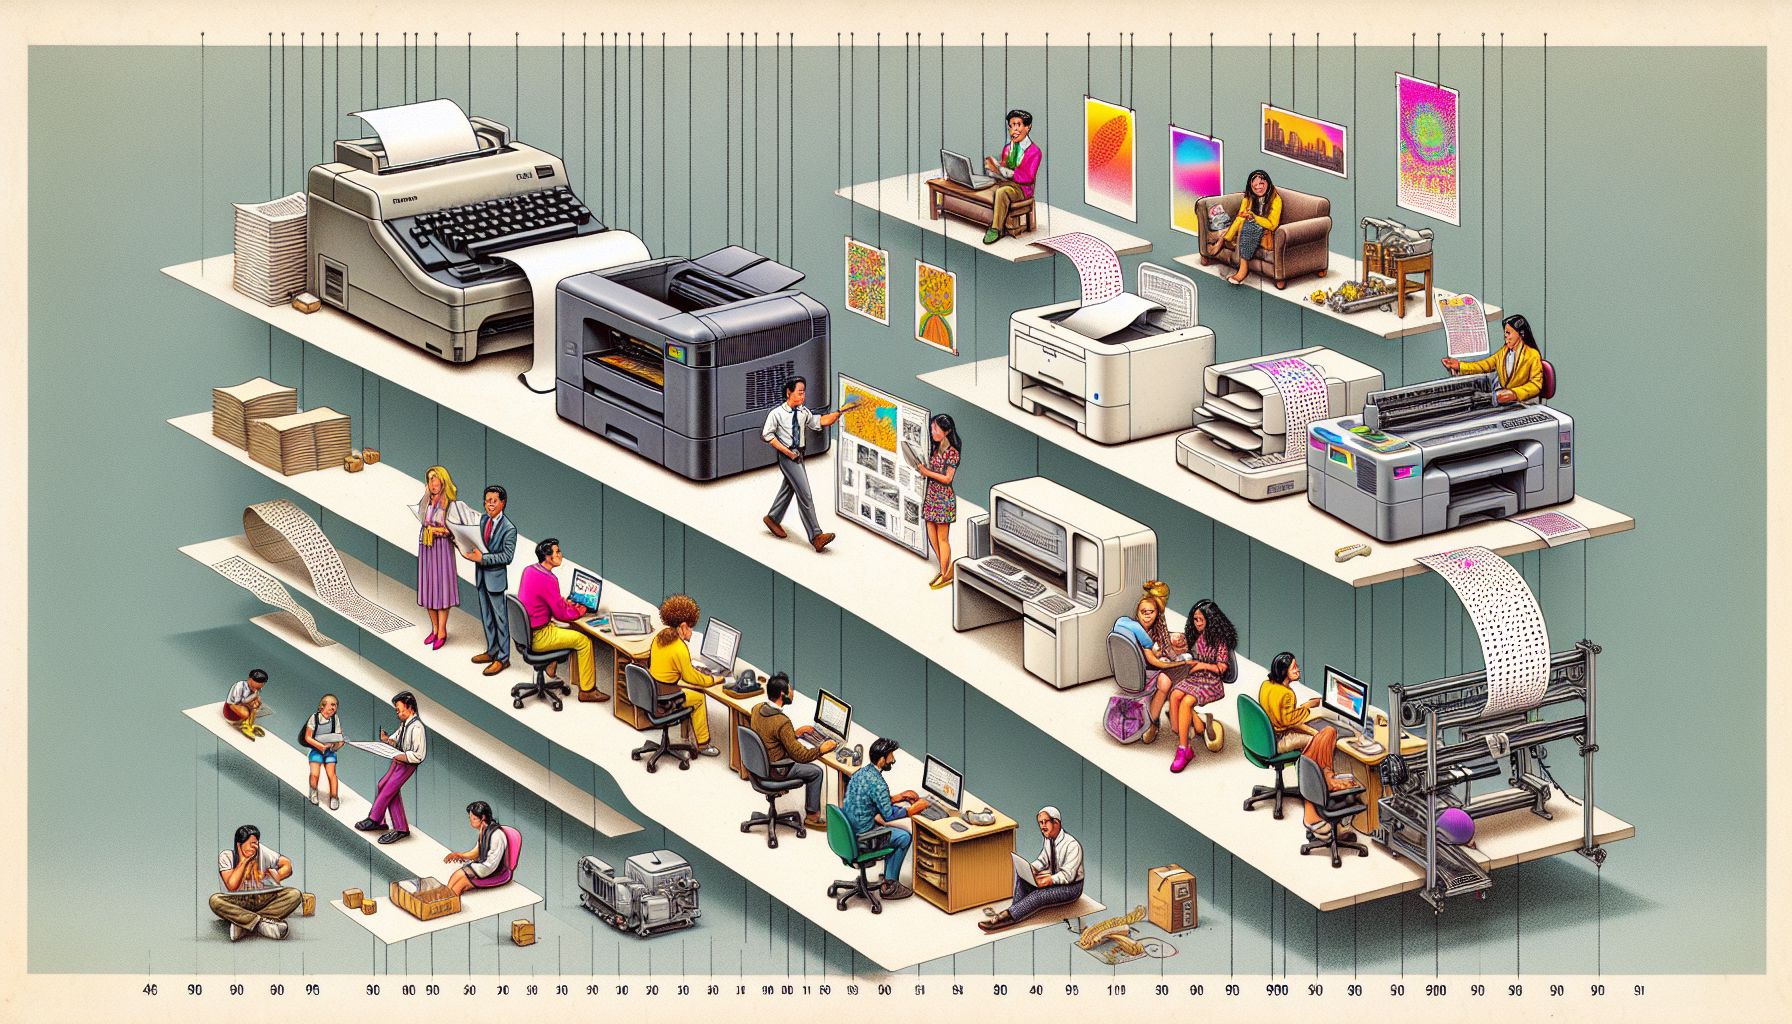 The Evolution of Printers: From Dot Matrix to 3D Printing